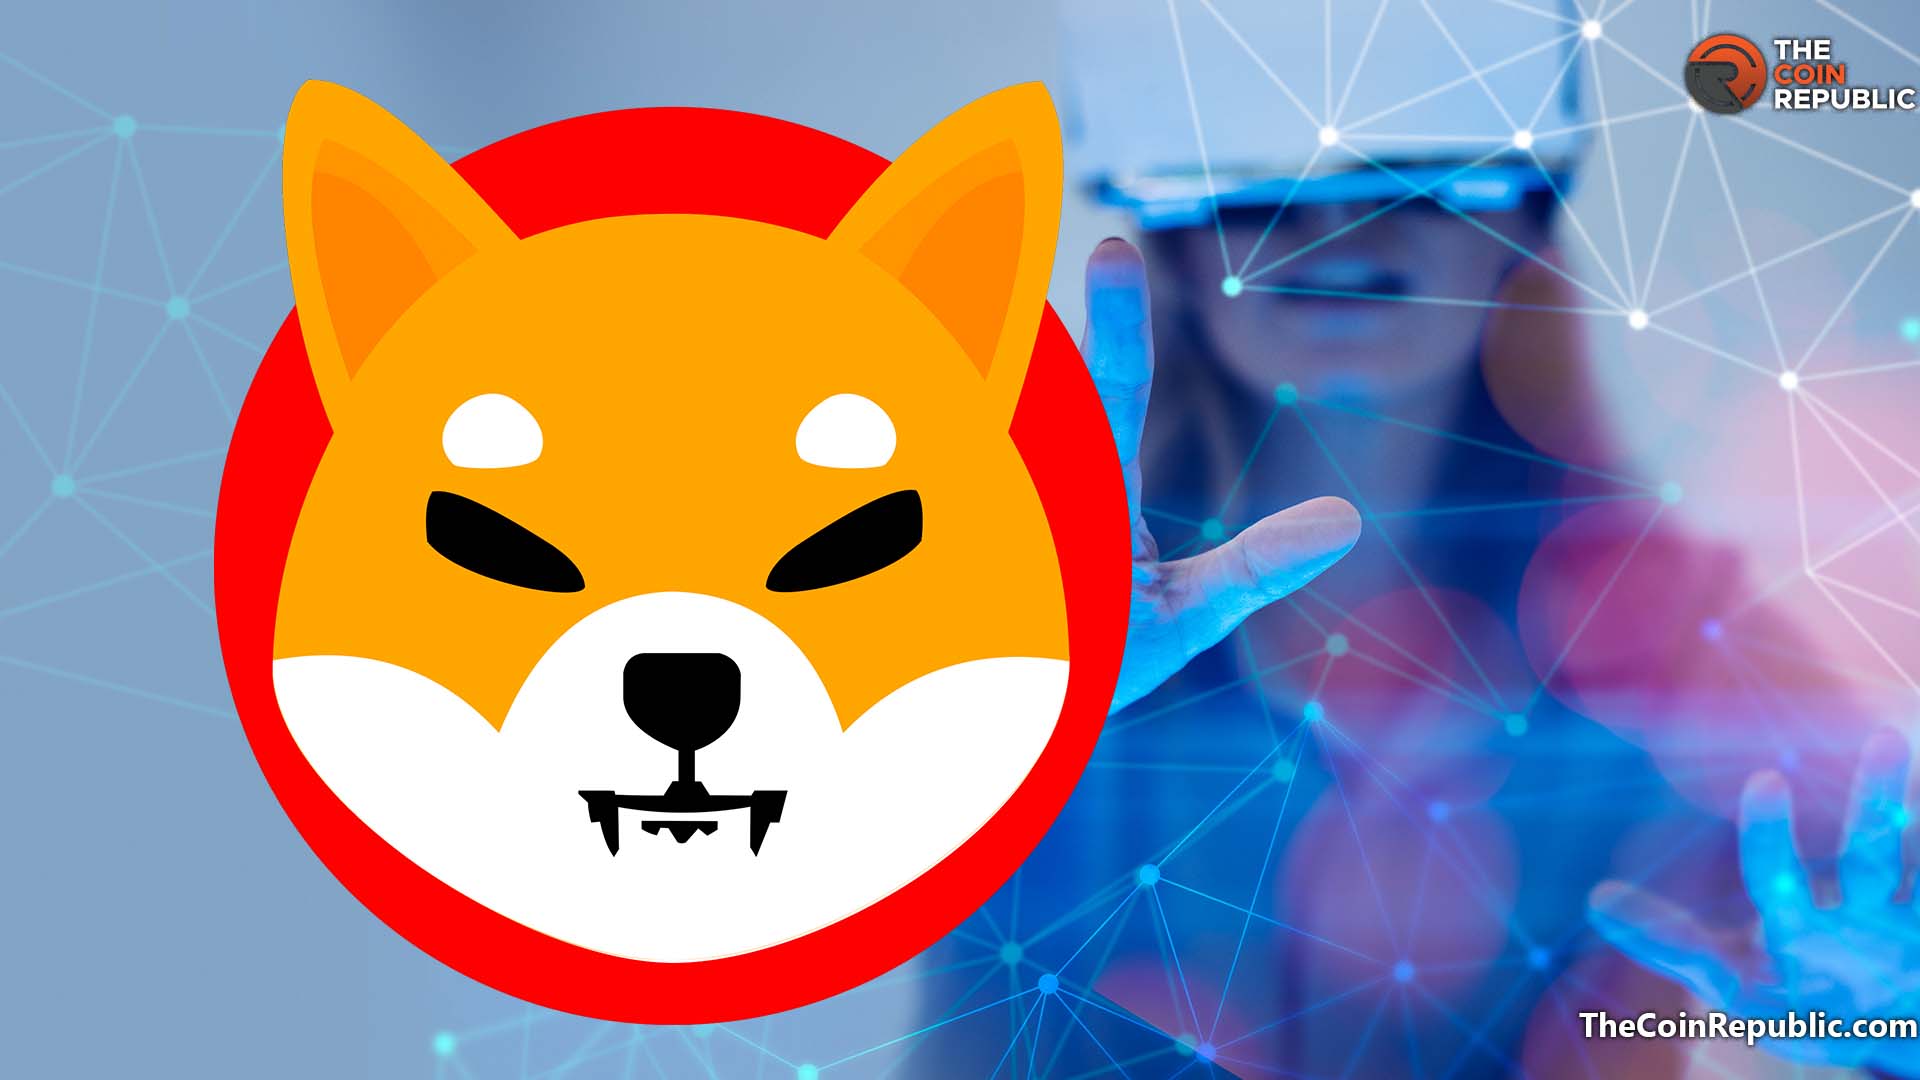 The Shib Metaverse Promotional Video to be Released Soon